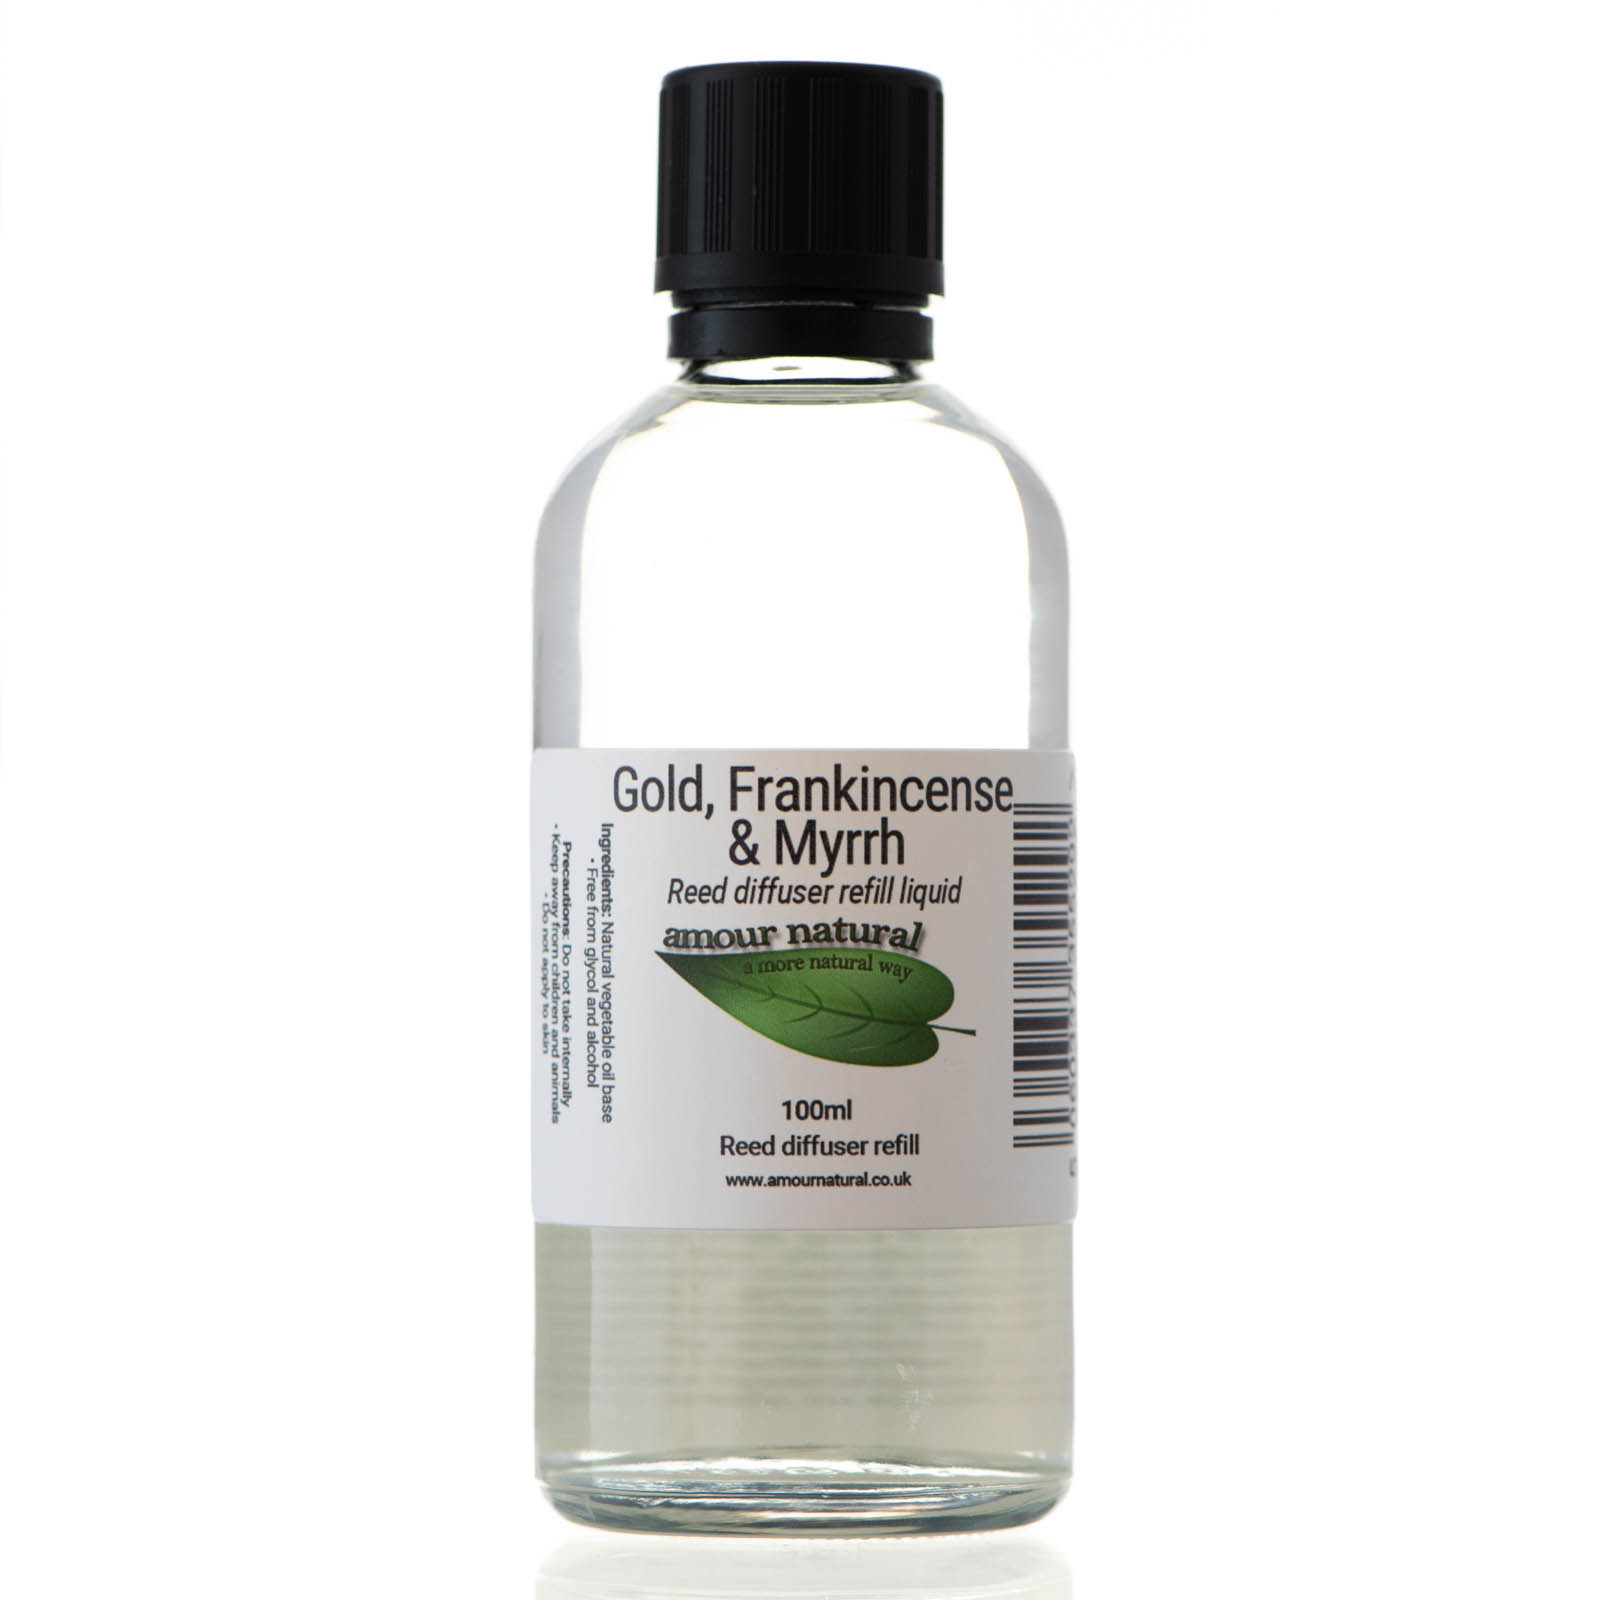 Gold, Frankincense and Myrrh reed diffuser refill (bottle only)